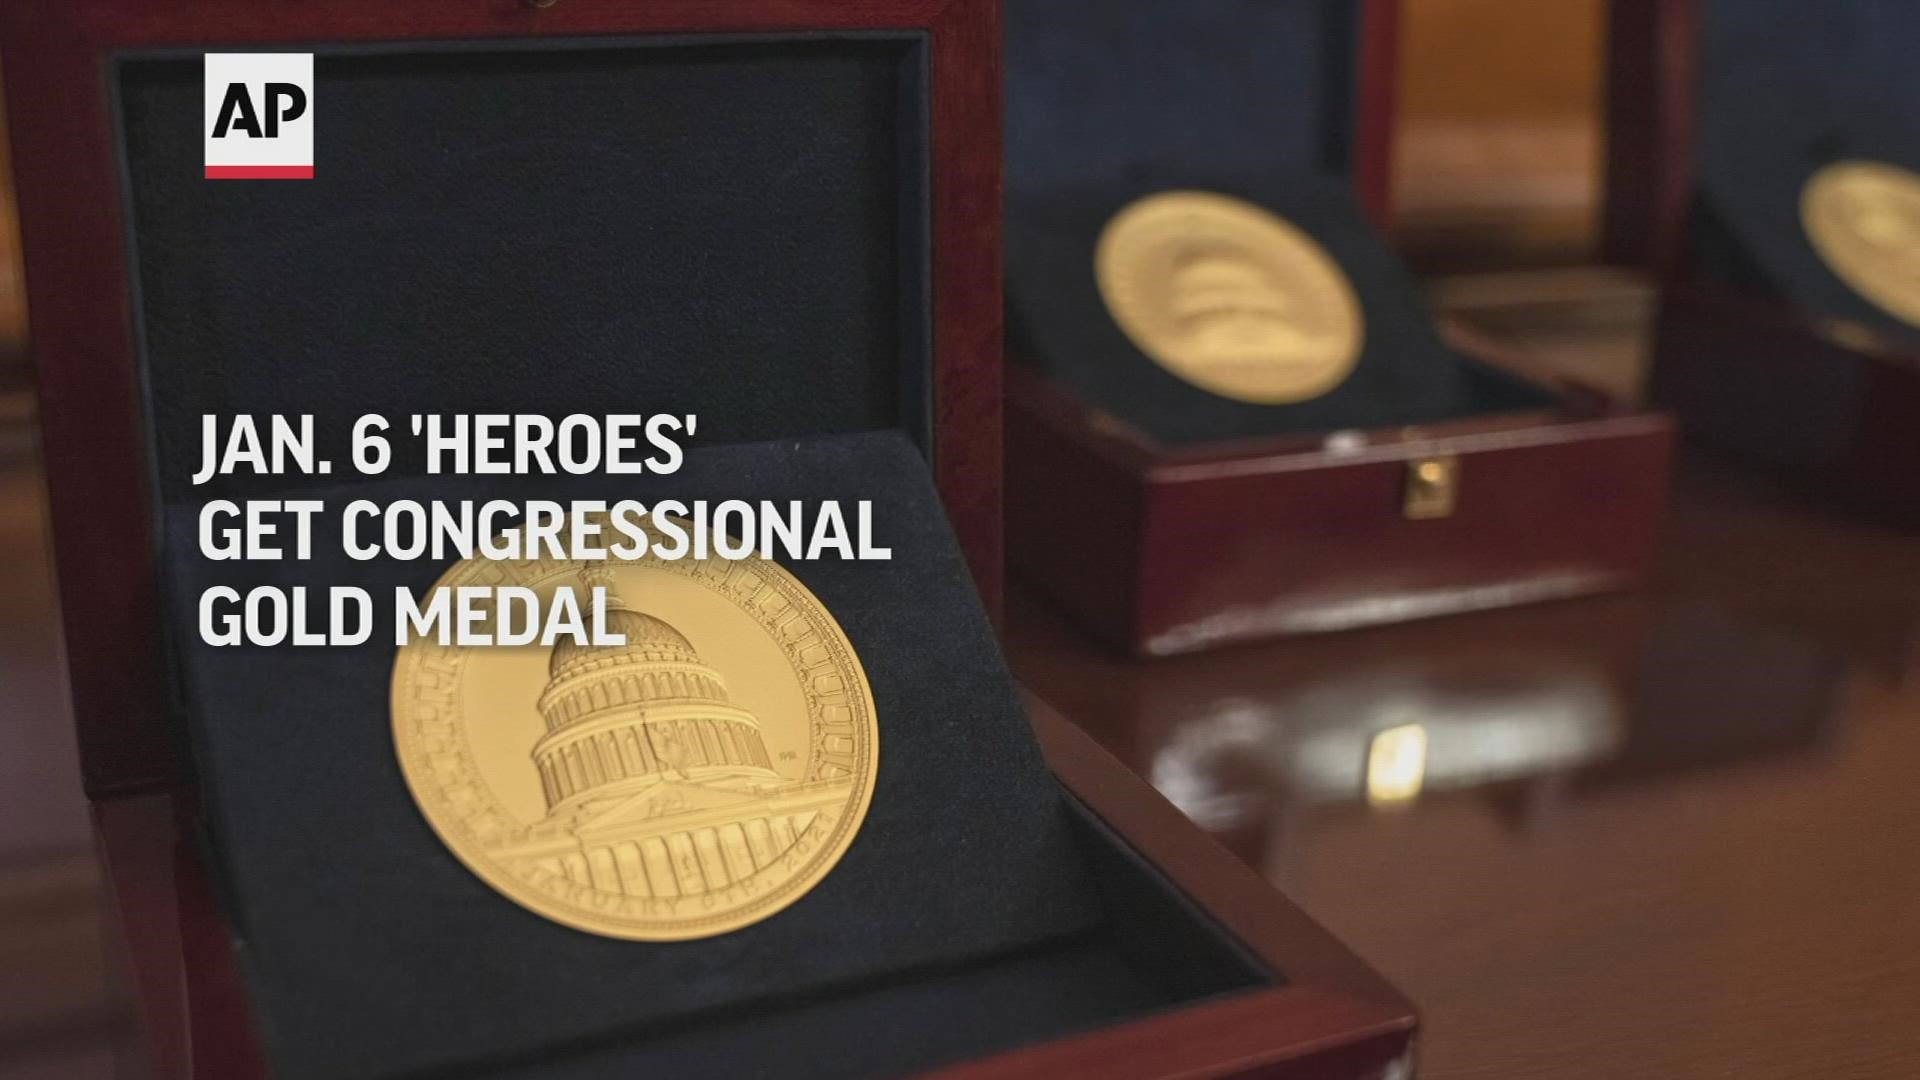 Law enforcement officers who defended the U.S. Capitol on Jan. 6, 2021 were honored Tuesday with Congressional Gold Medals.